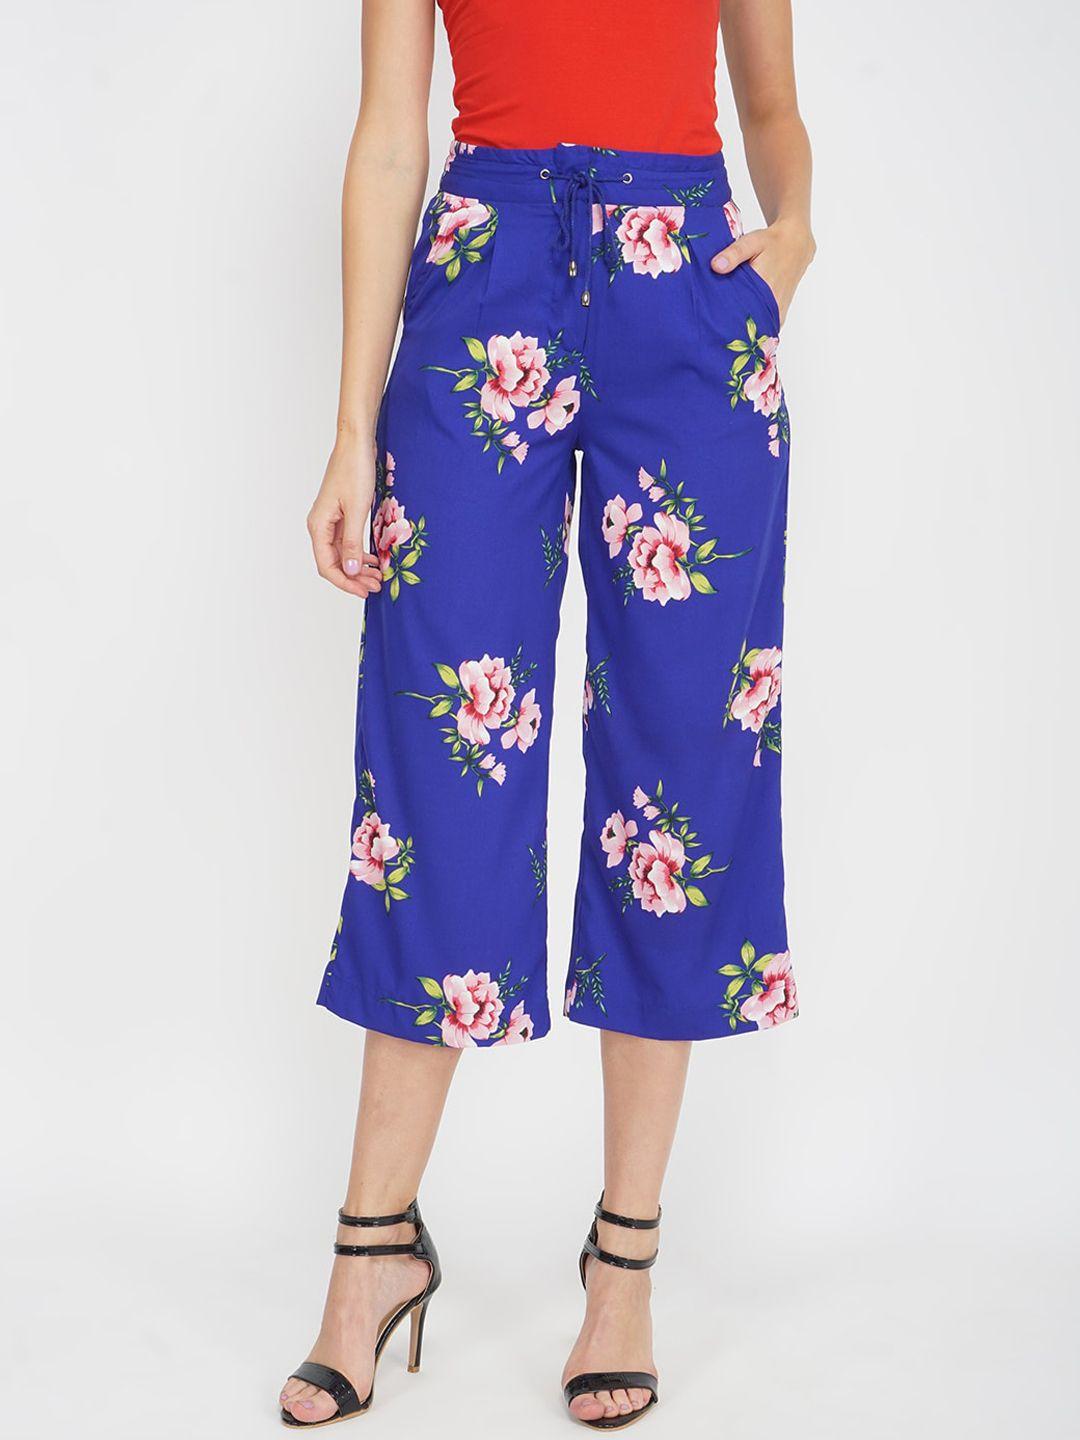 oxolloxo women blue floral printed high-rise culottes trousers